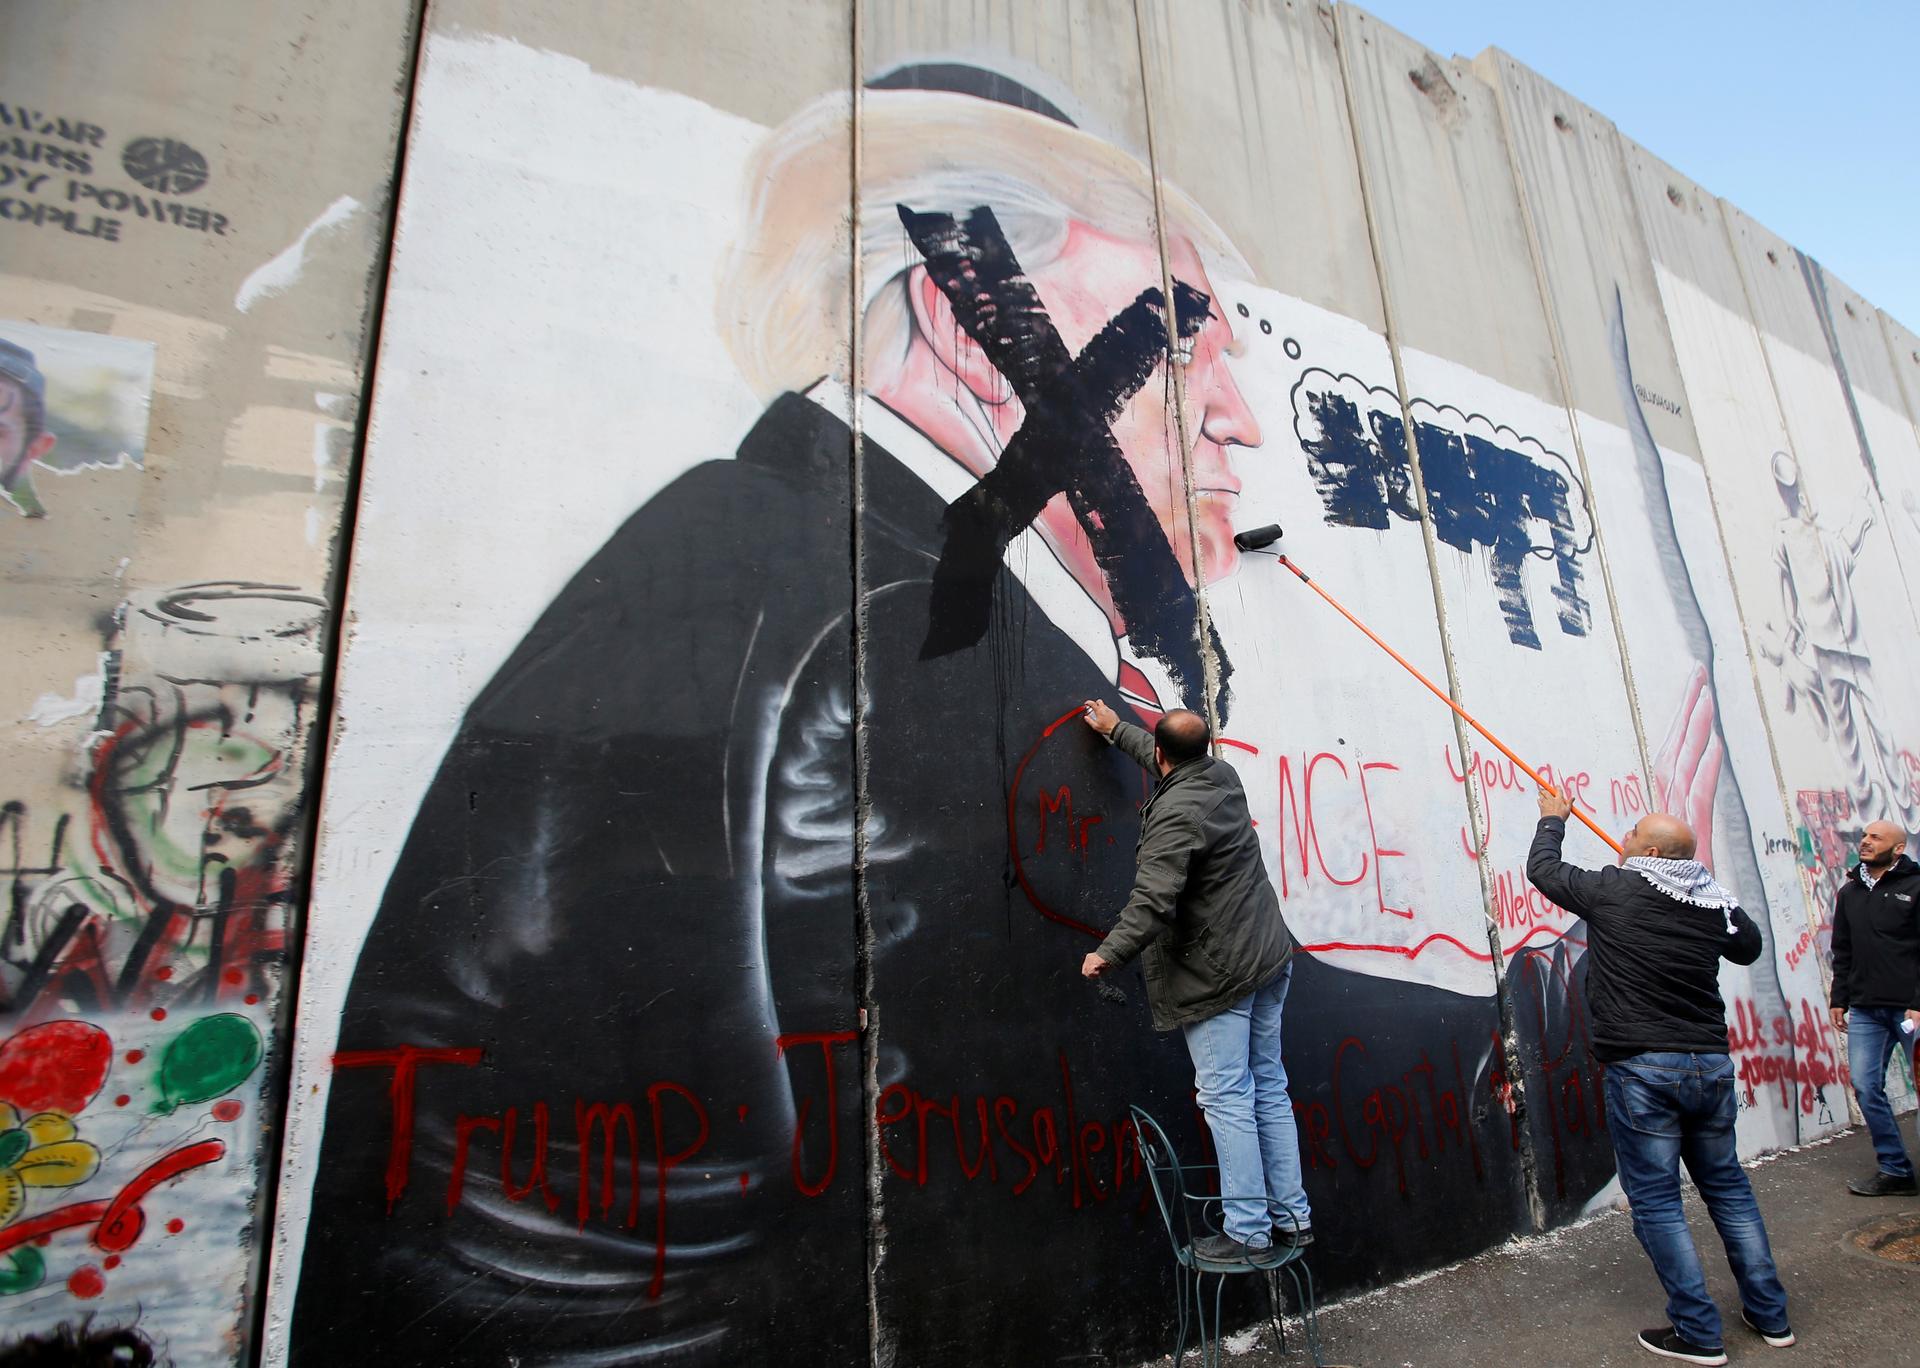 Men paint over a mural depicting US President Donald Trump painted on a part of the Israeli separation barrier, in the West Bank city of Bethlehem, Dec. 7, 2017.